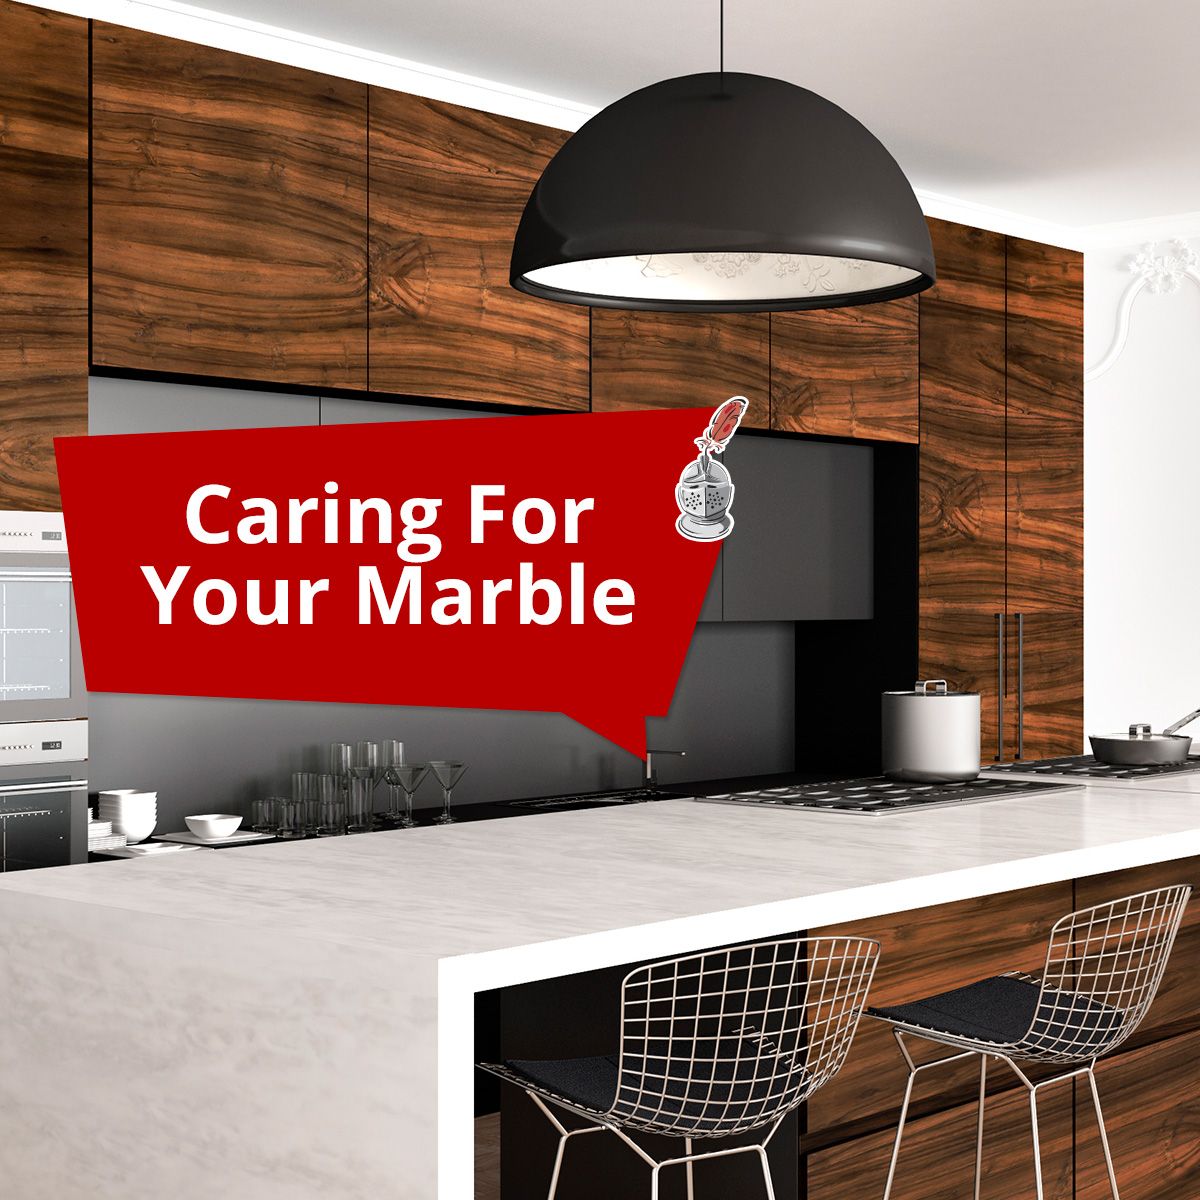 Caring For Your Marble